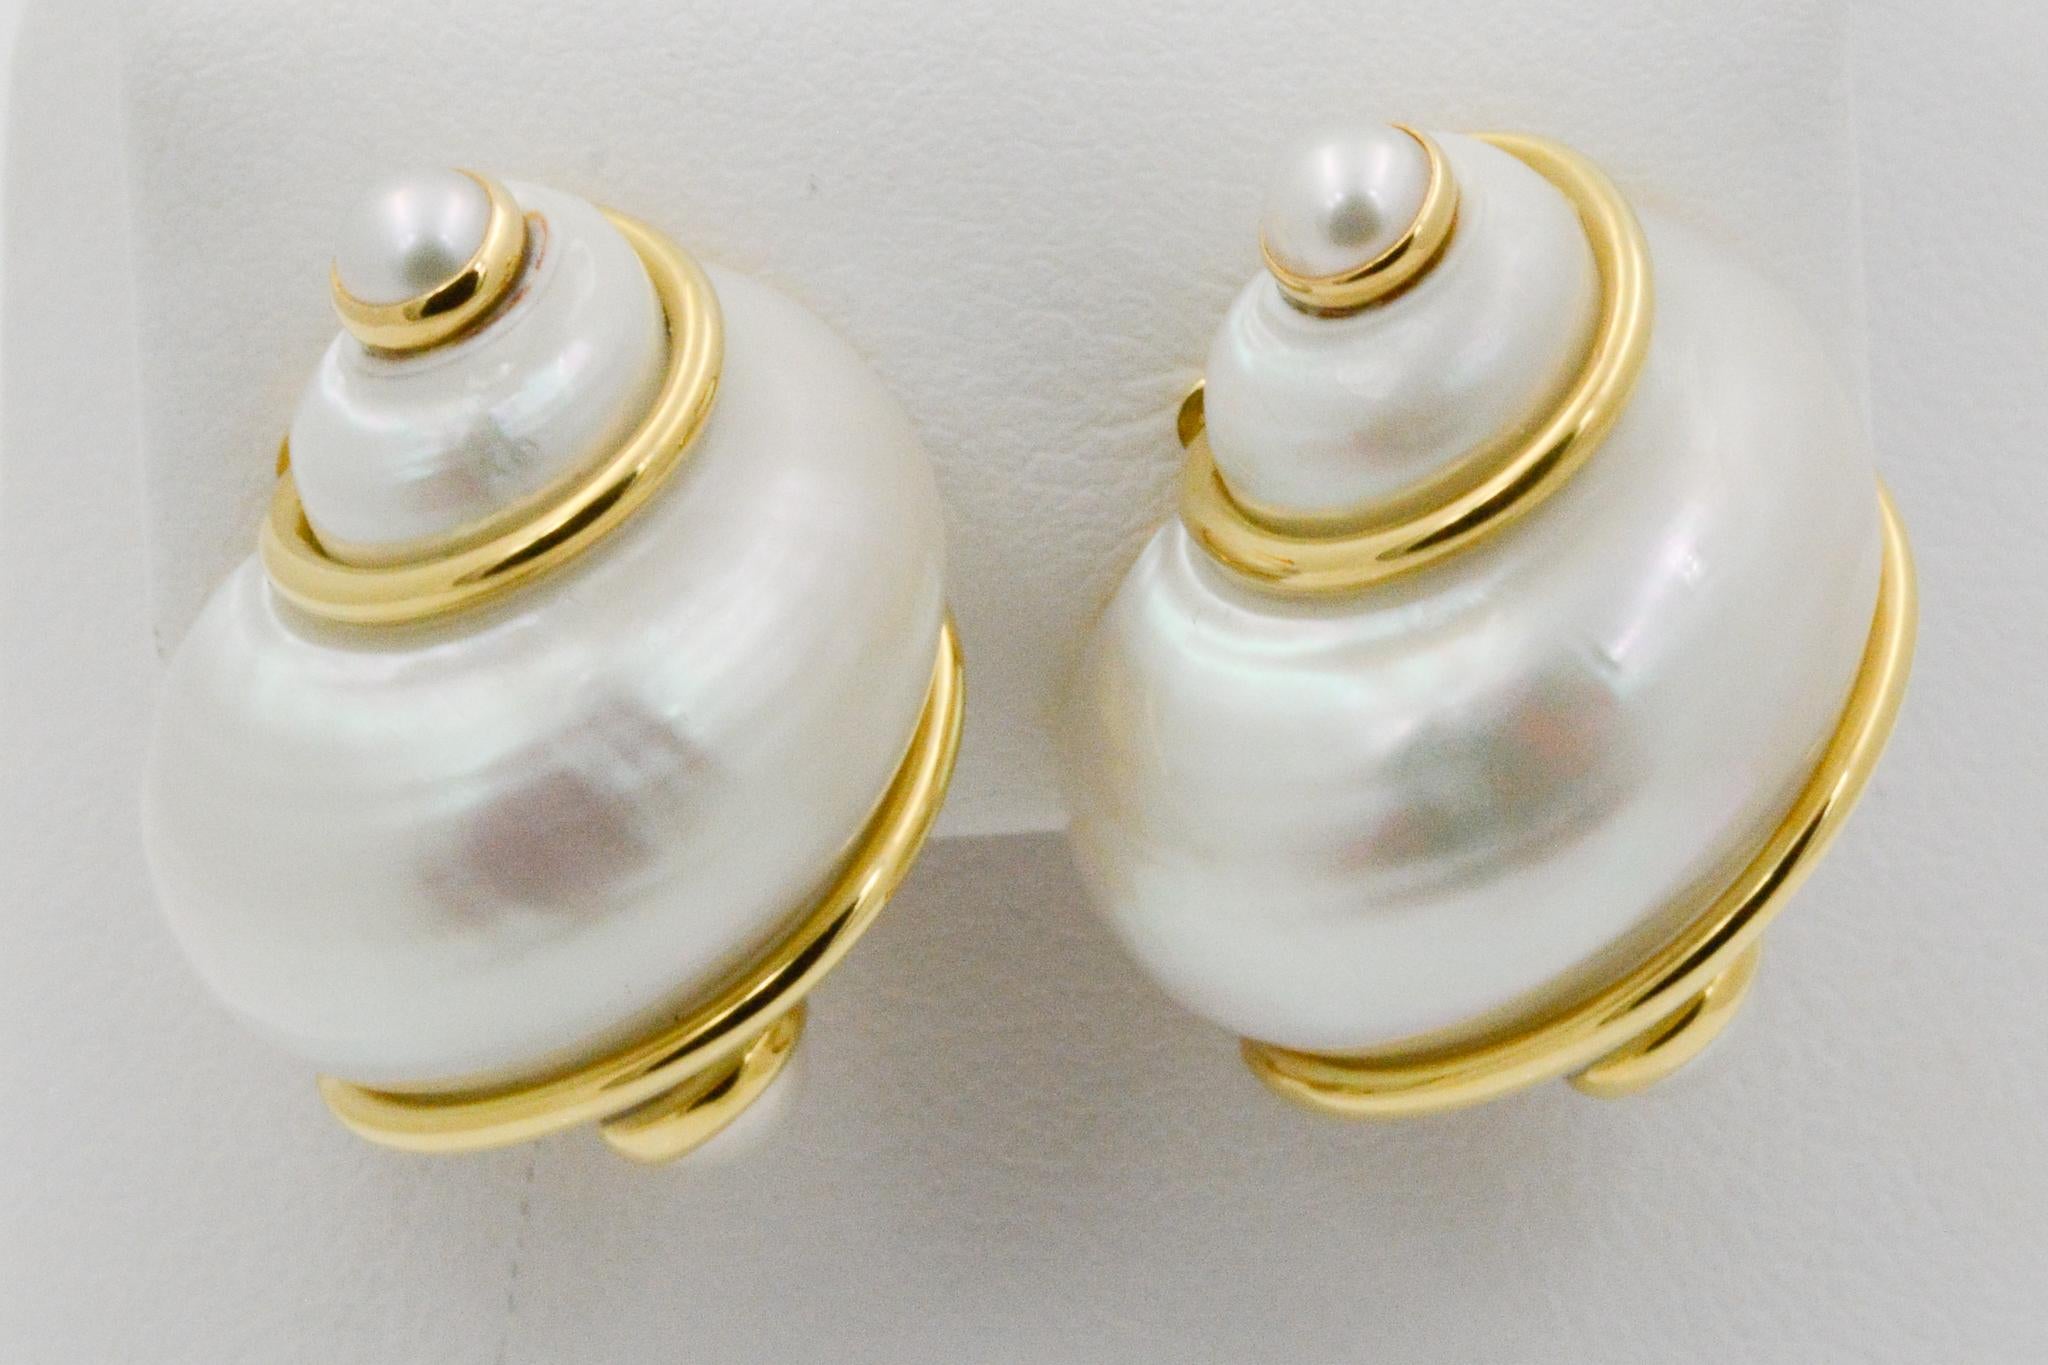 From Seaman Schepps, these Turbo shell earrings have four white pearls on the ends. 18k yellow gold wraps around the shell. The earrings have clip backs and are signed by Seaman Schepps.